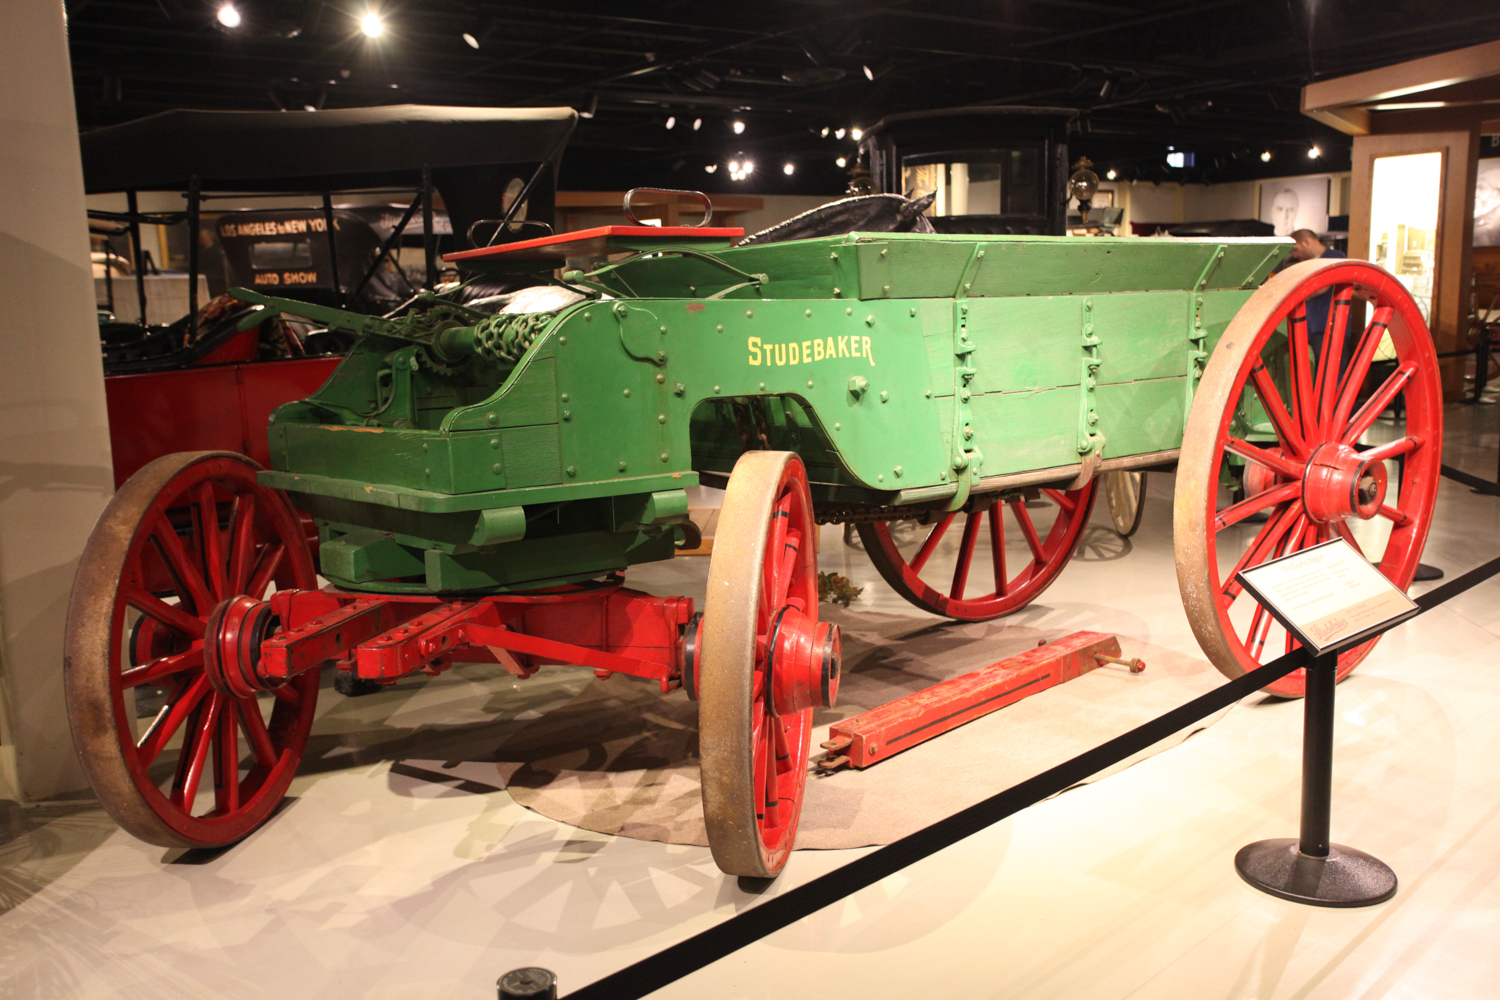 Studebaker made many different types of wagons. The workwagons were typically painted green and red with Studebaker in yellow letters. 